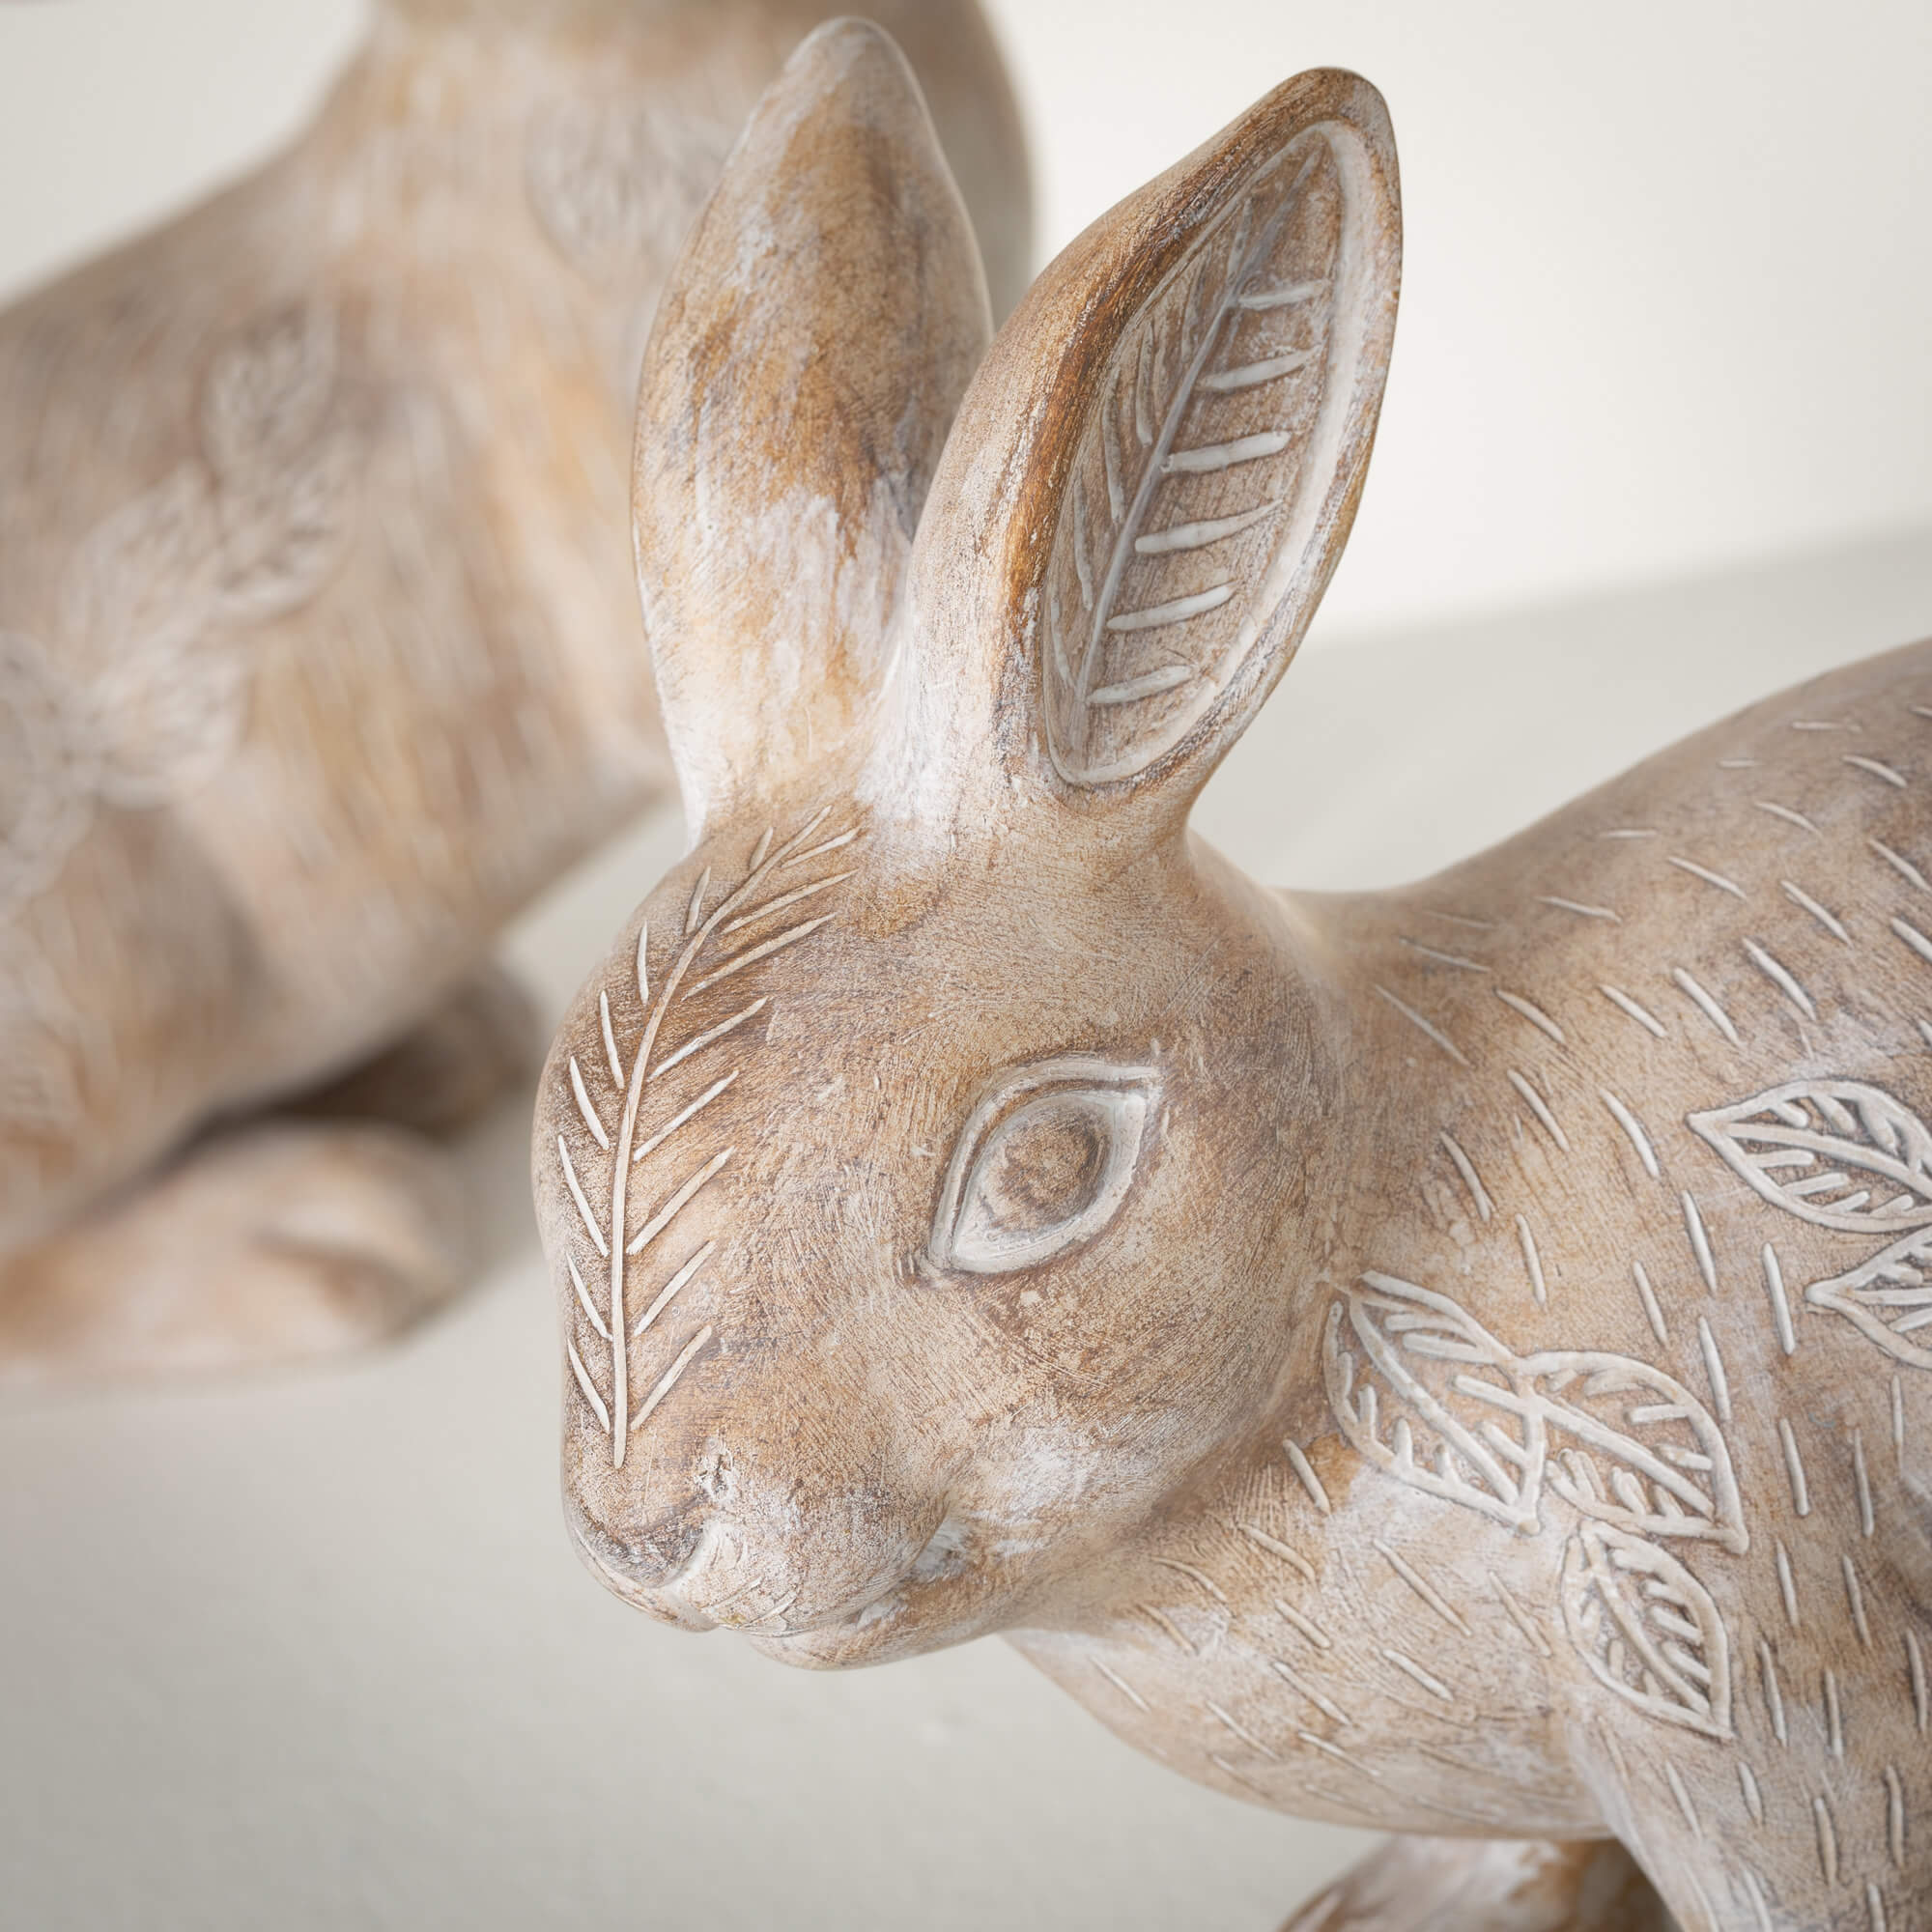 Resting Stance Bunny Statues Elevate Home Decor - Sculptures & Statues